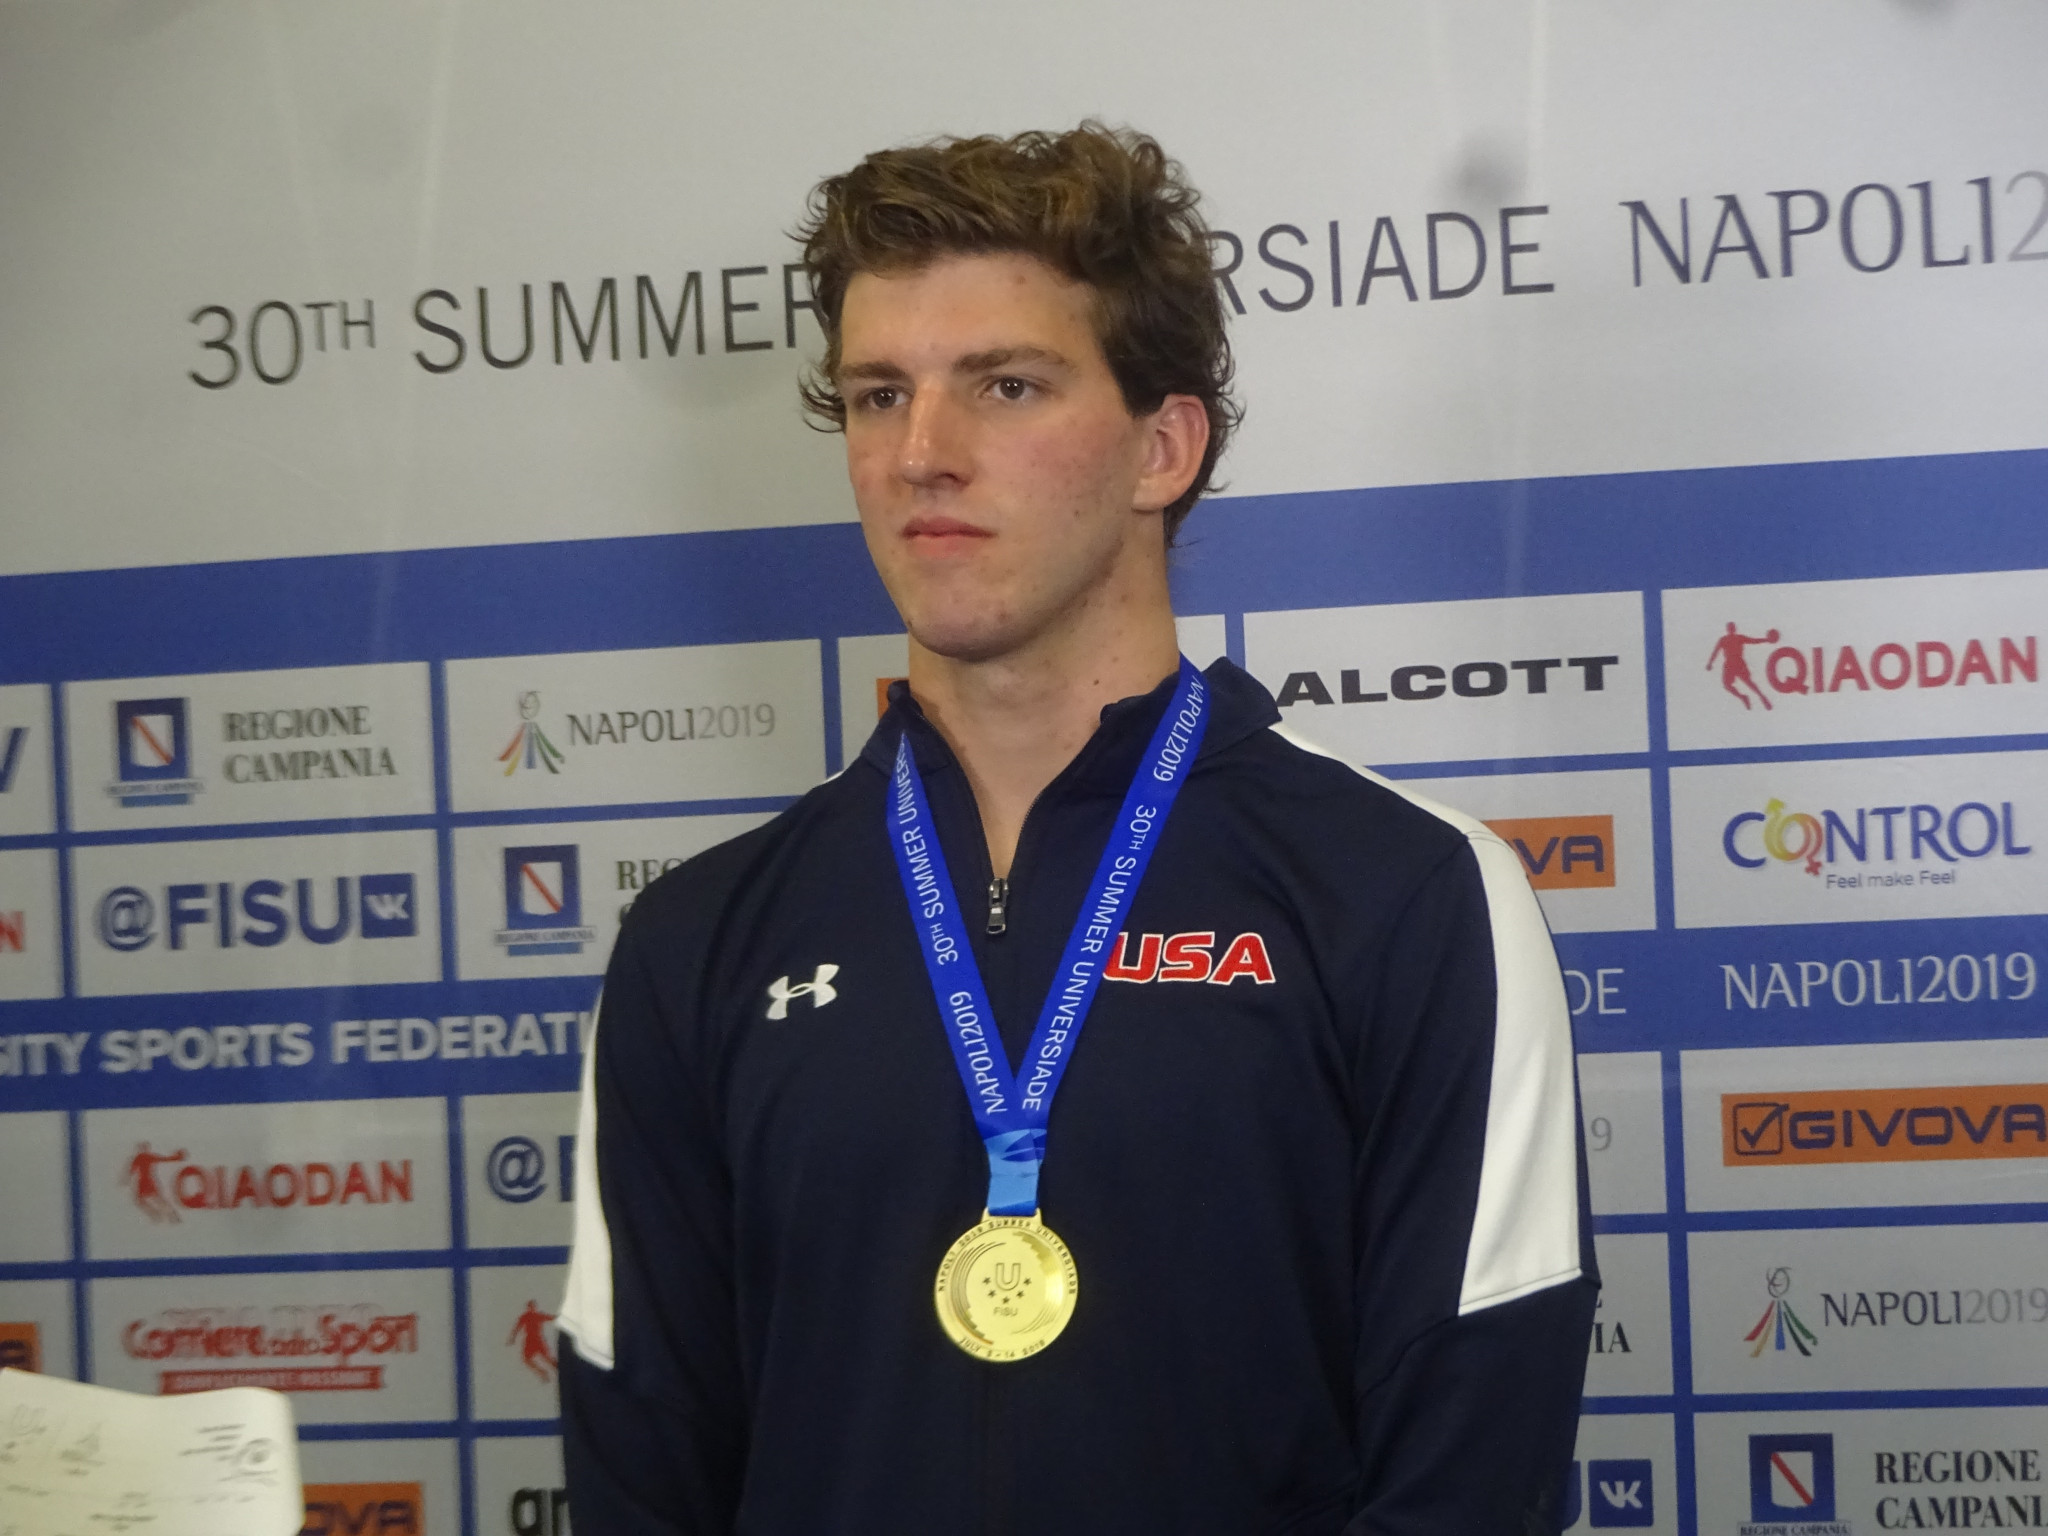 Zach Apple completed a hat-trick of gold medals as he won 100m freestyle gold at Piscina Scandone ©Philip Barker